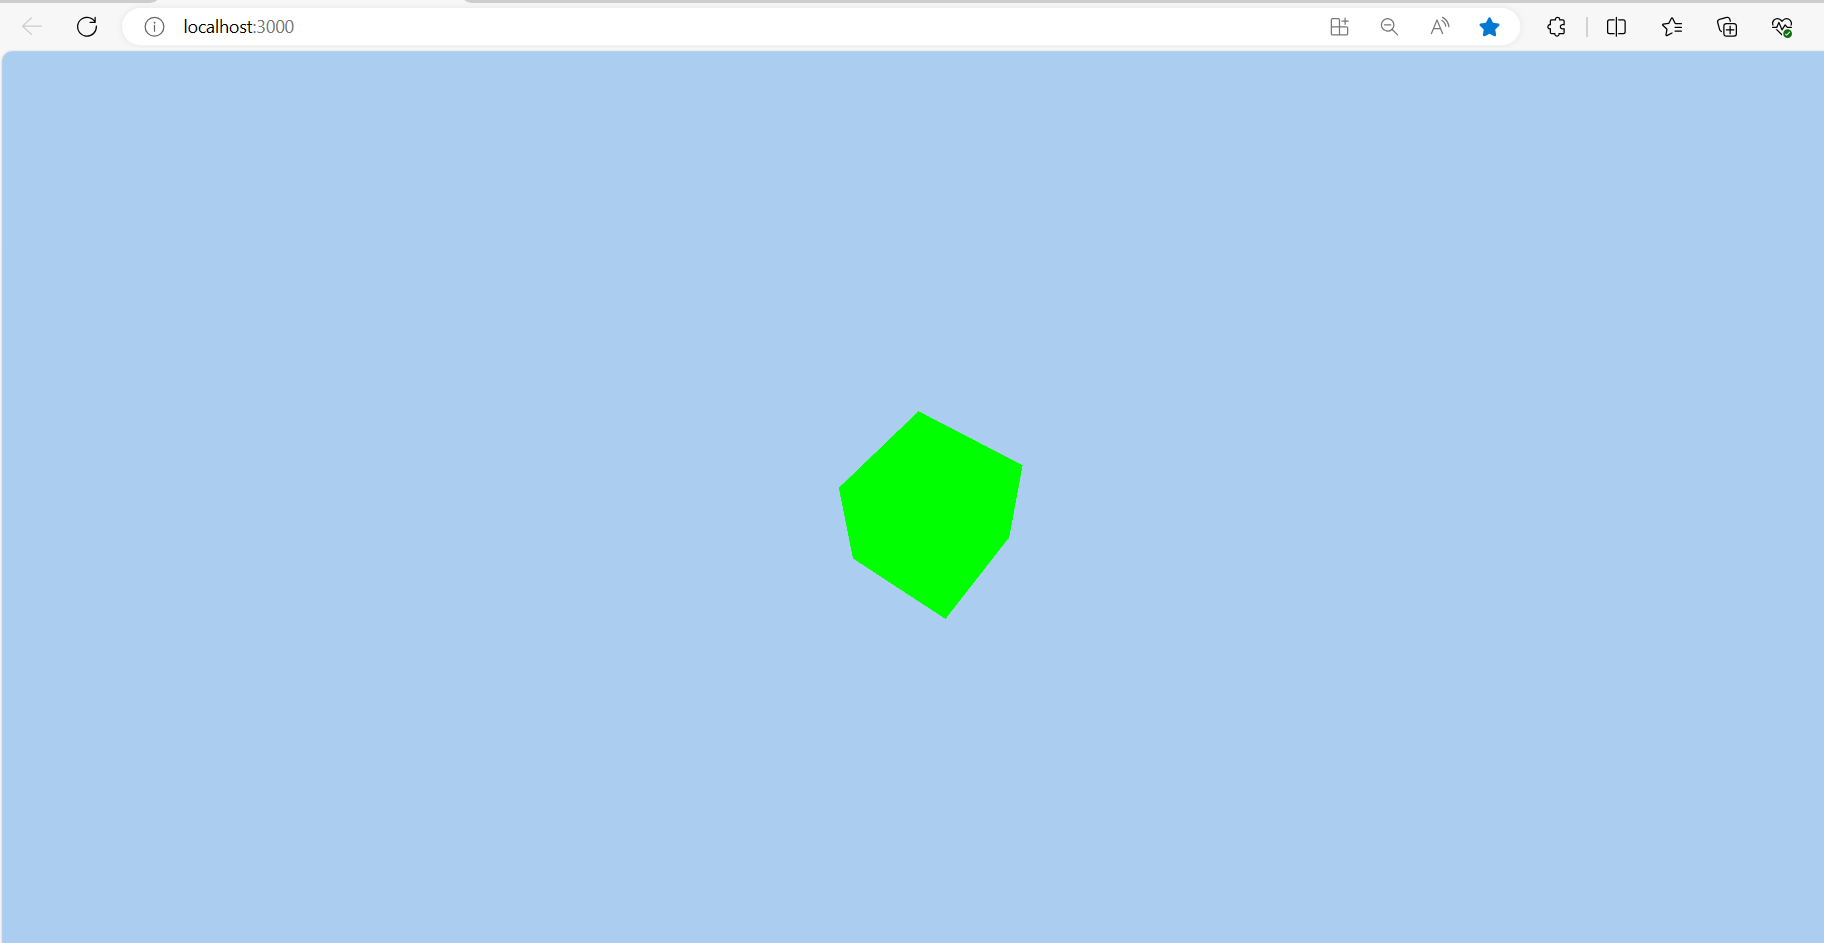 Implementing Three.js within a React.js application